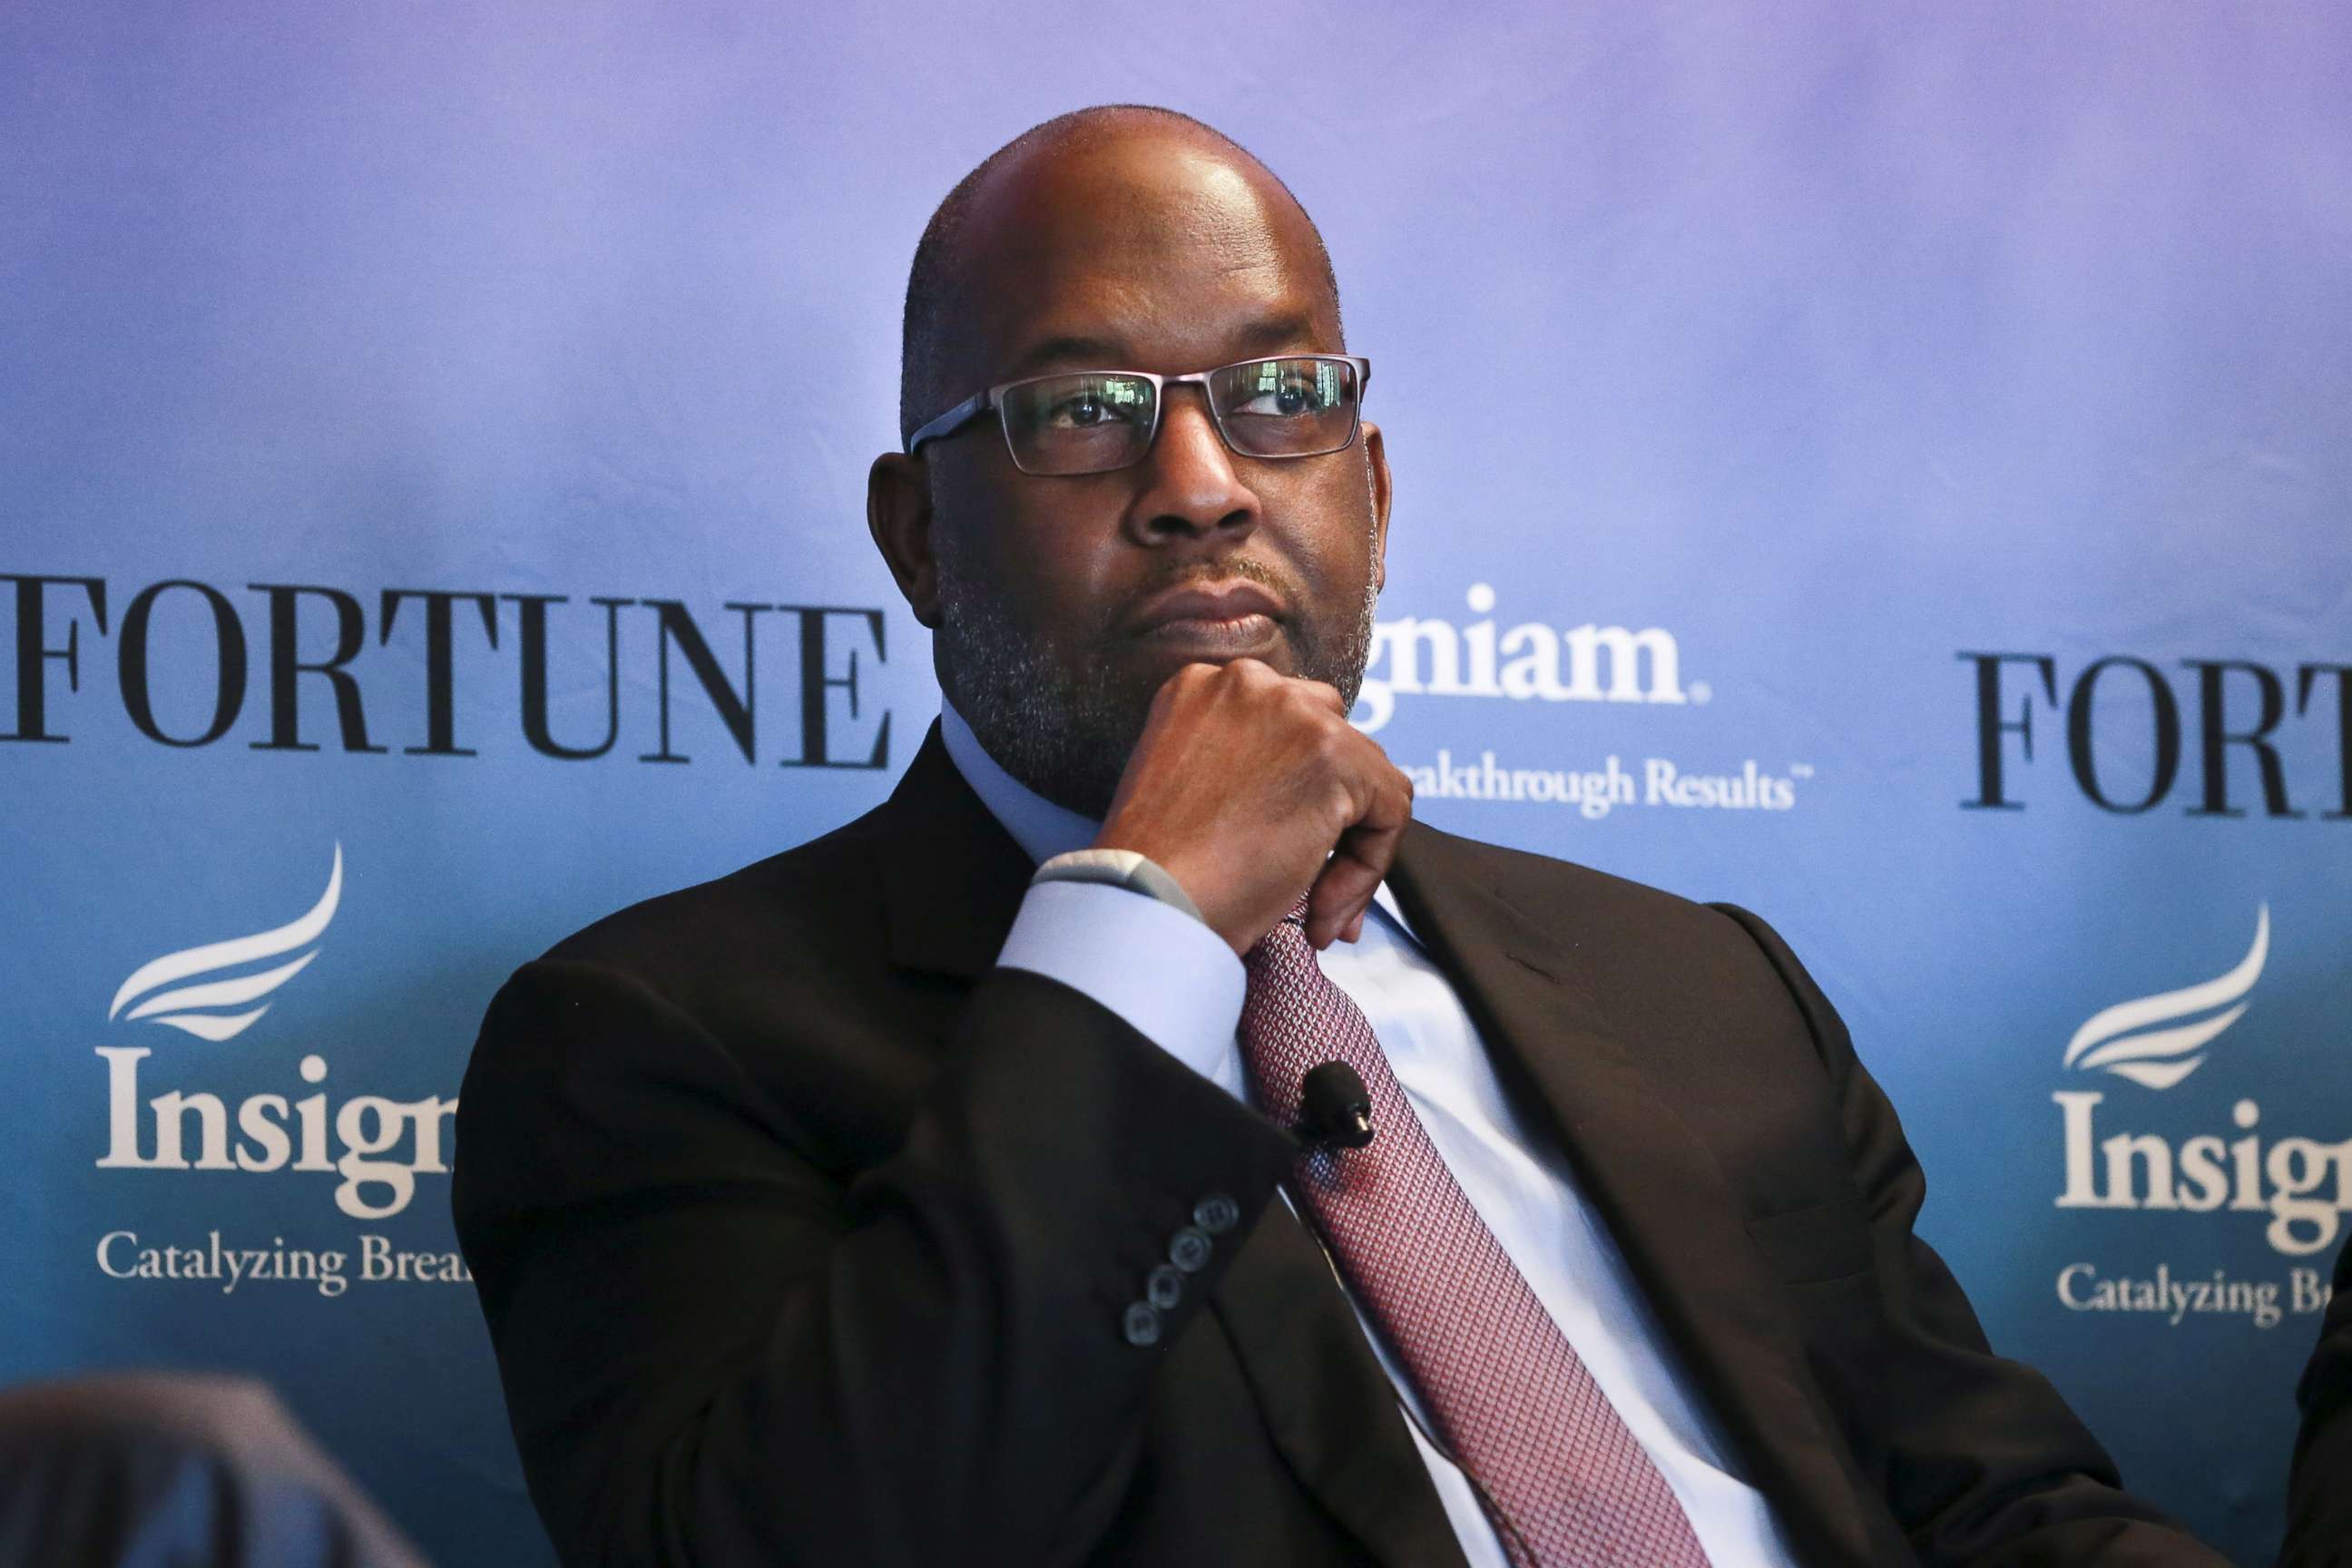 FILE PHOTO: Bernard Tyson, CEO of Kaiser Permanente, participates in a panel discussion at the 2015 Fortune Global Forum in San Francisco on Nov. 3, 2015. He died on Sunday, Nov. 10, 2019.